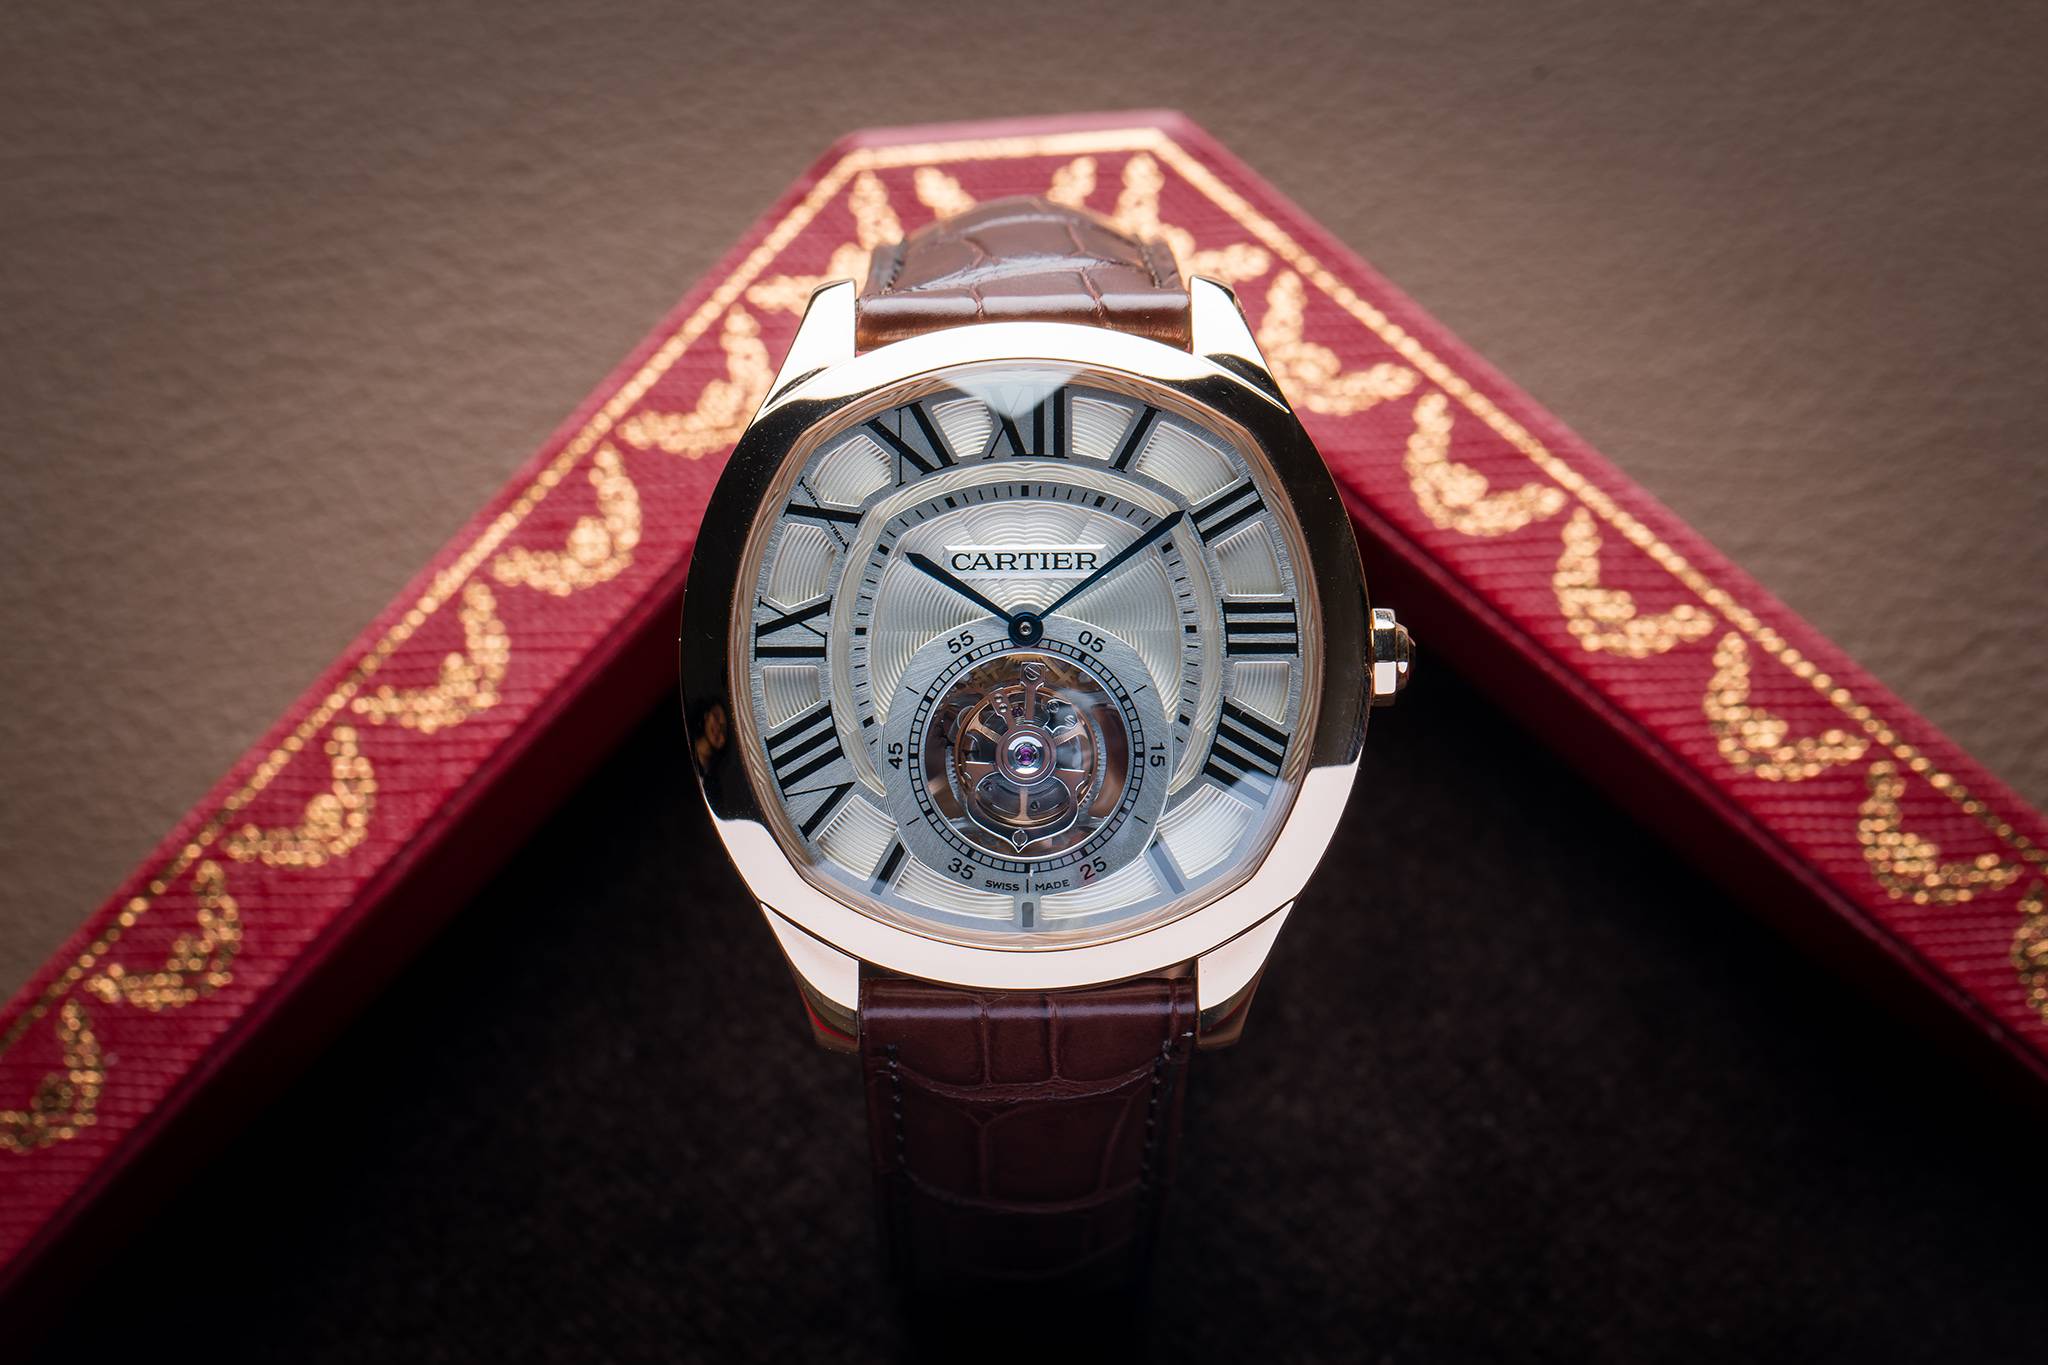 SIHH 2016: Introducing The Drive de Cartier Collection